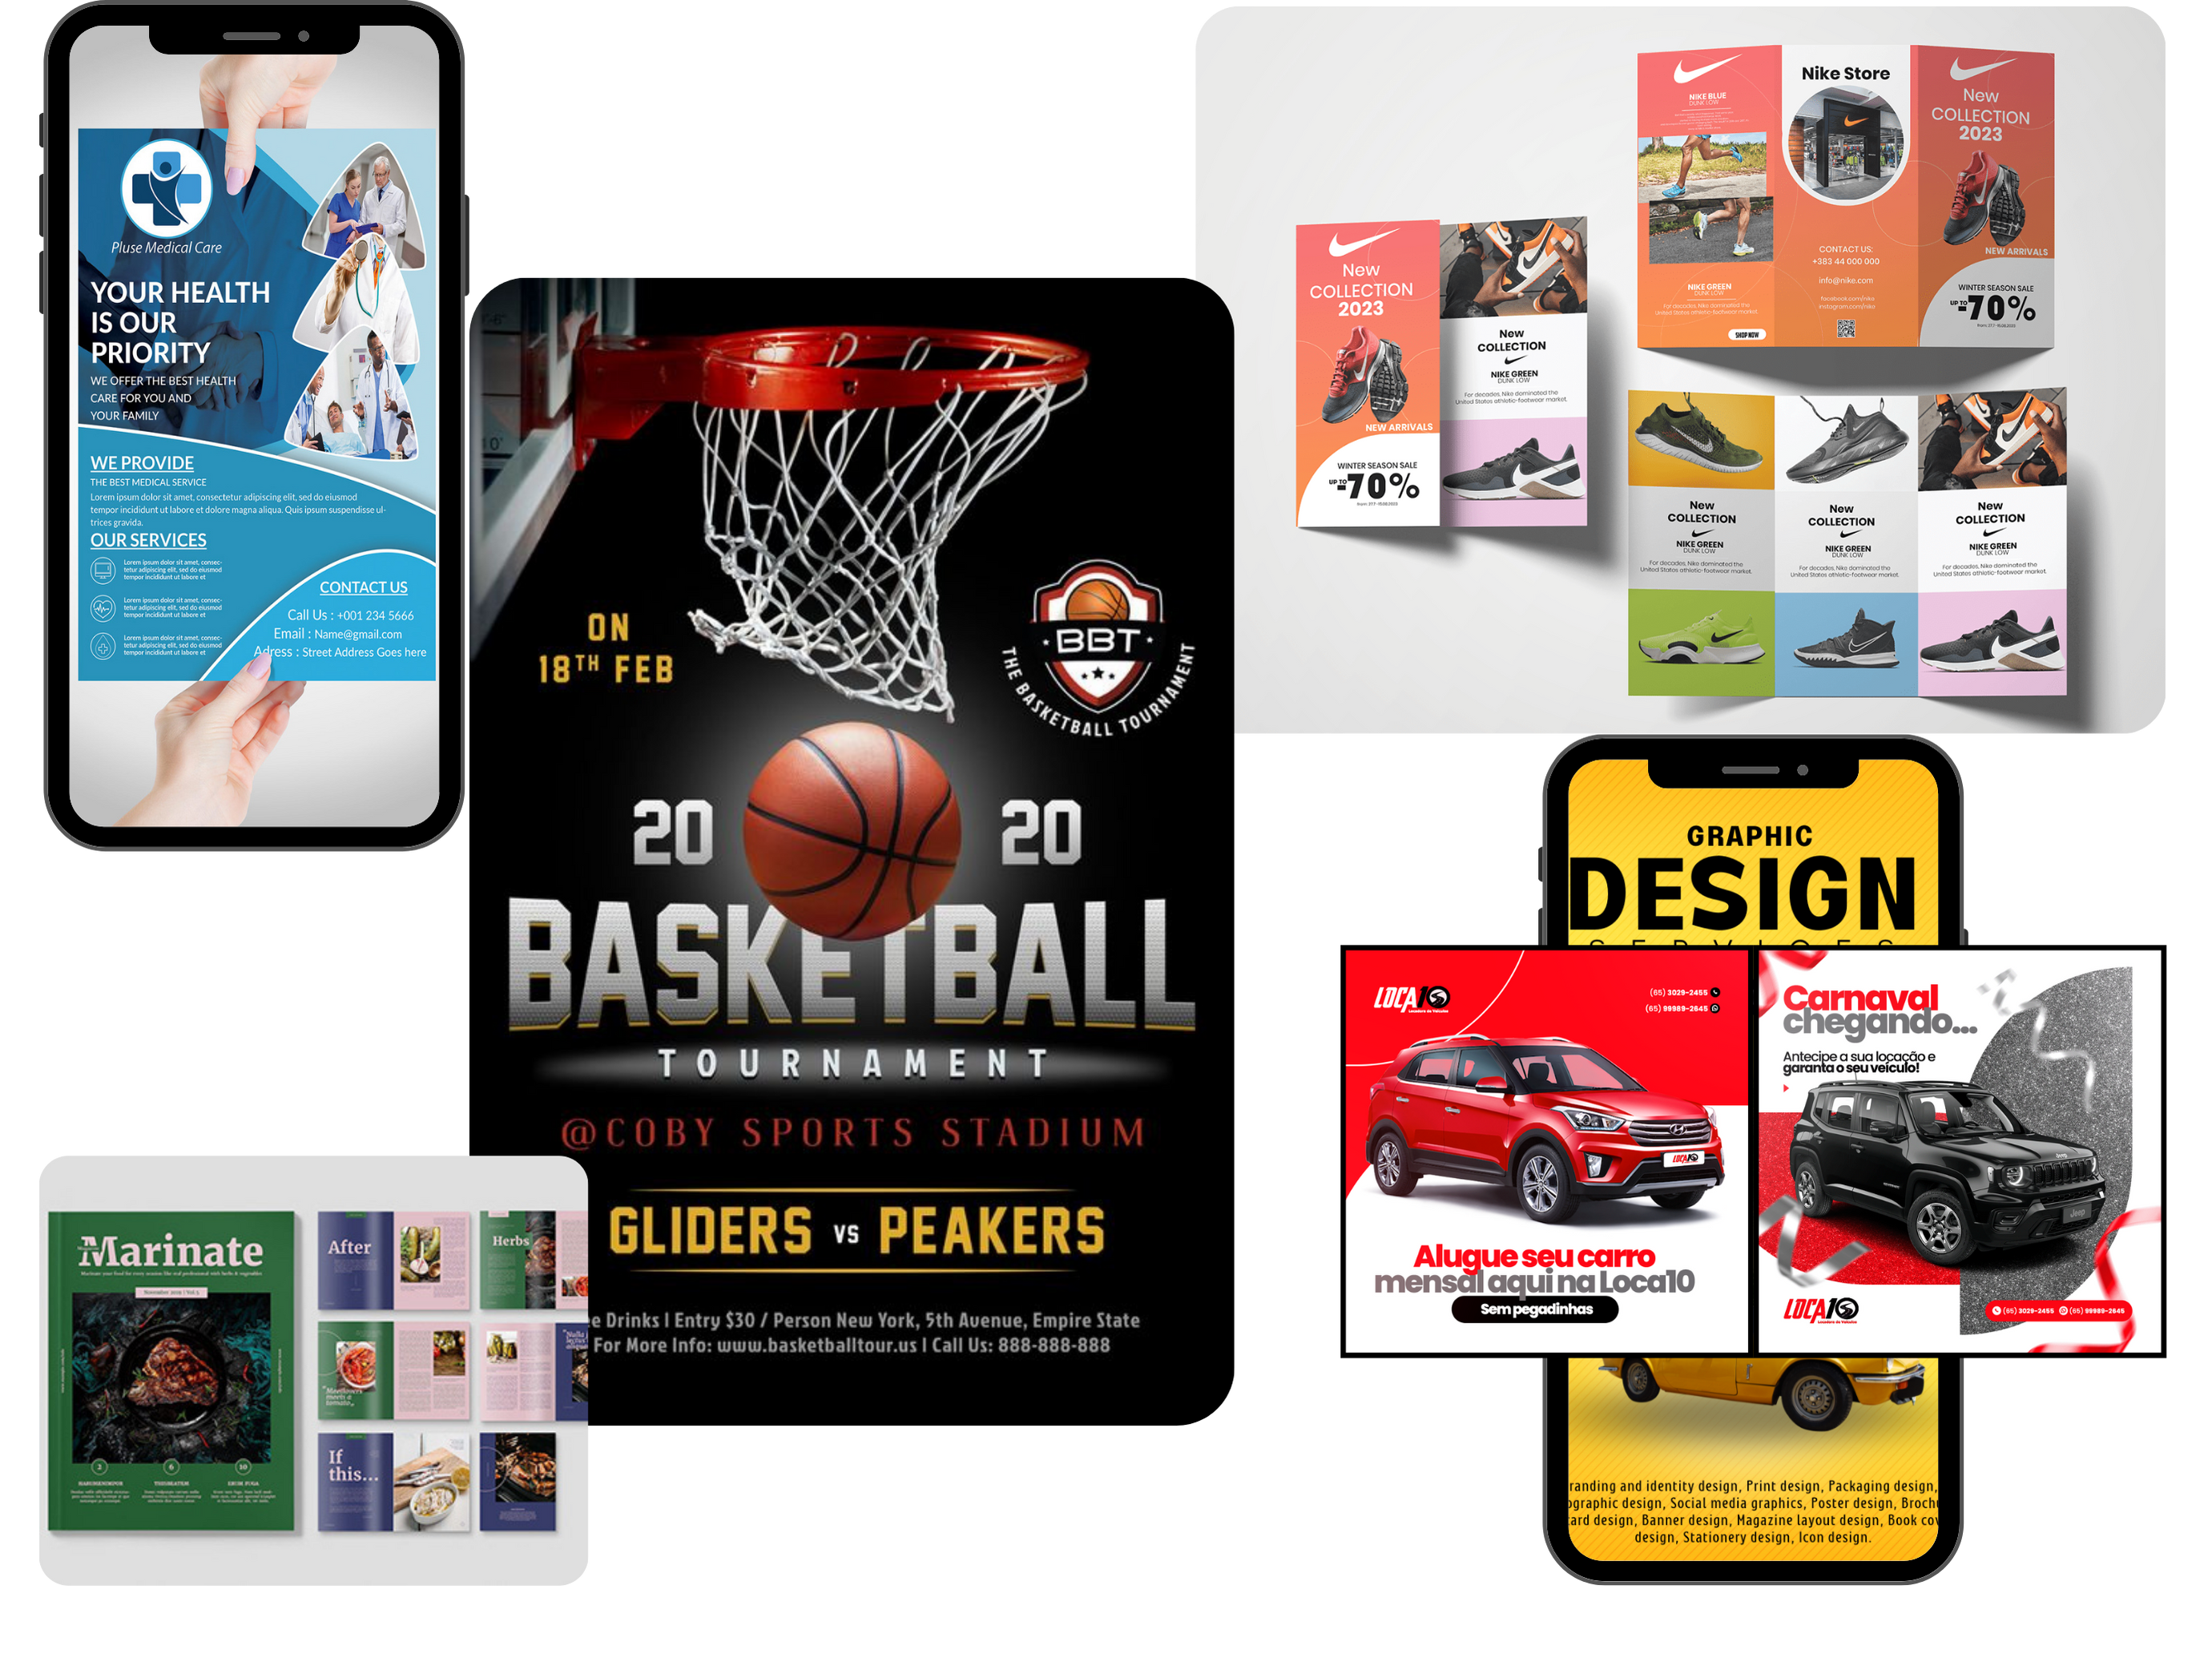 Marketing Material, flyers, brochure, poster services by digitalyzd.com